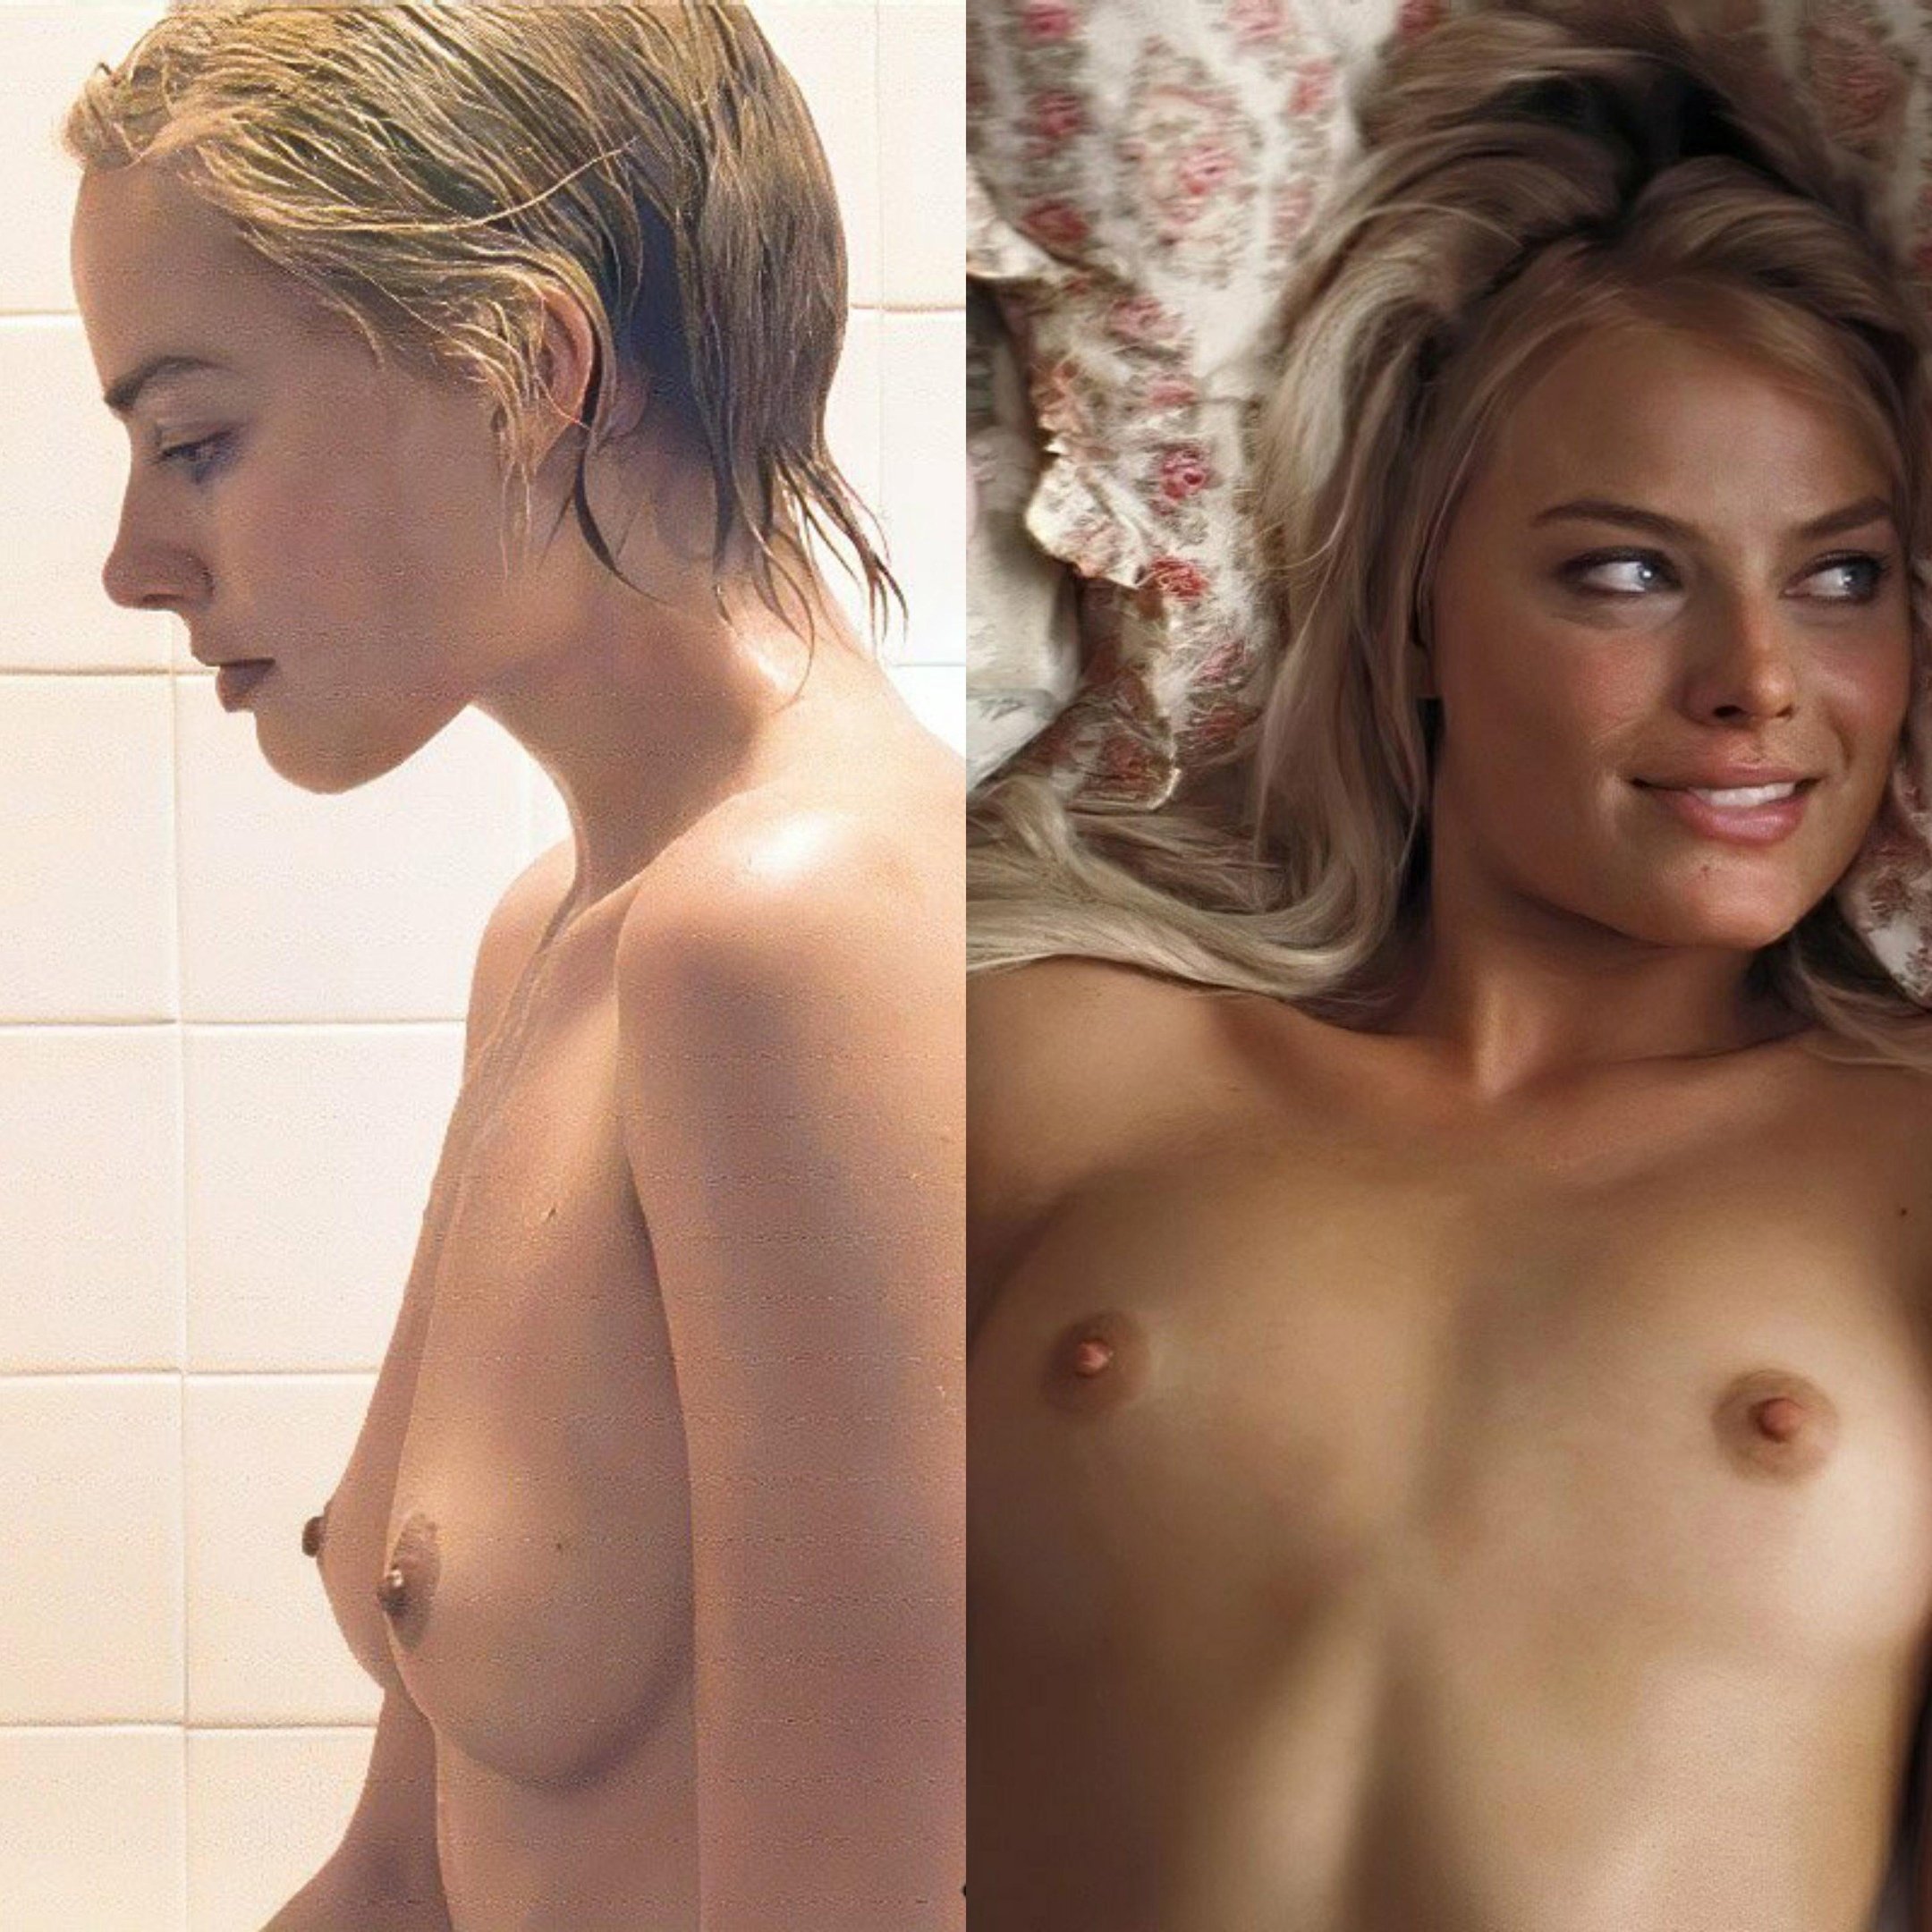 christine moseley recommends margot robbie nude free pic